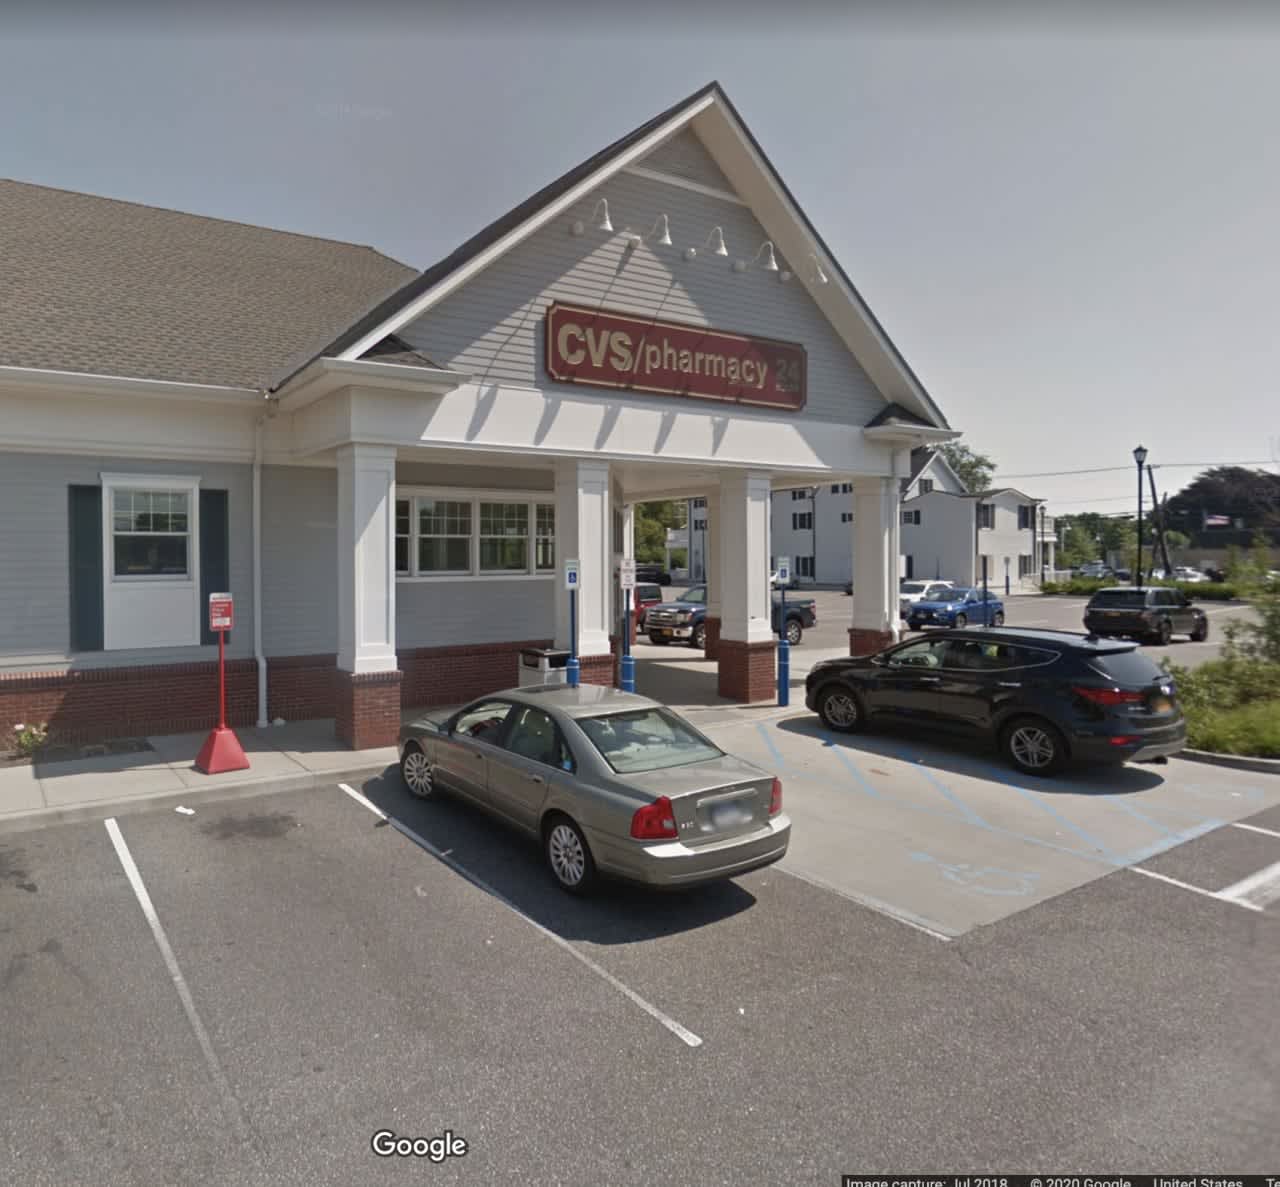 Two men allegedly robbed the CVS in West Islip at gunpoint.